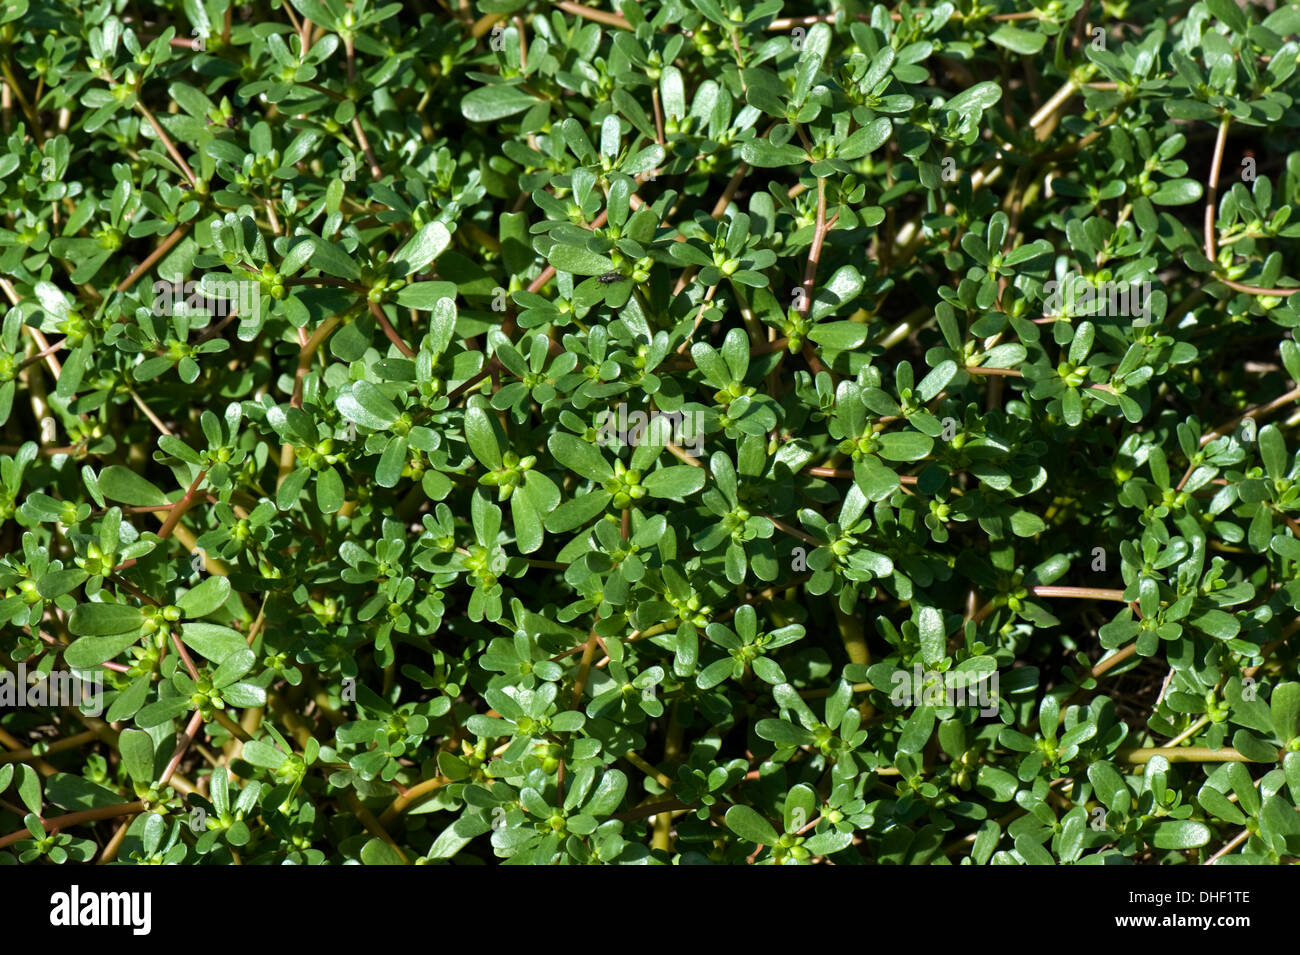 Common purslane or pigweed, Portulaca oleracea, succulent plant a wild leaf vegetable or arable weed Stock Photo